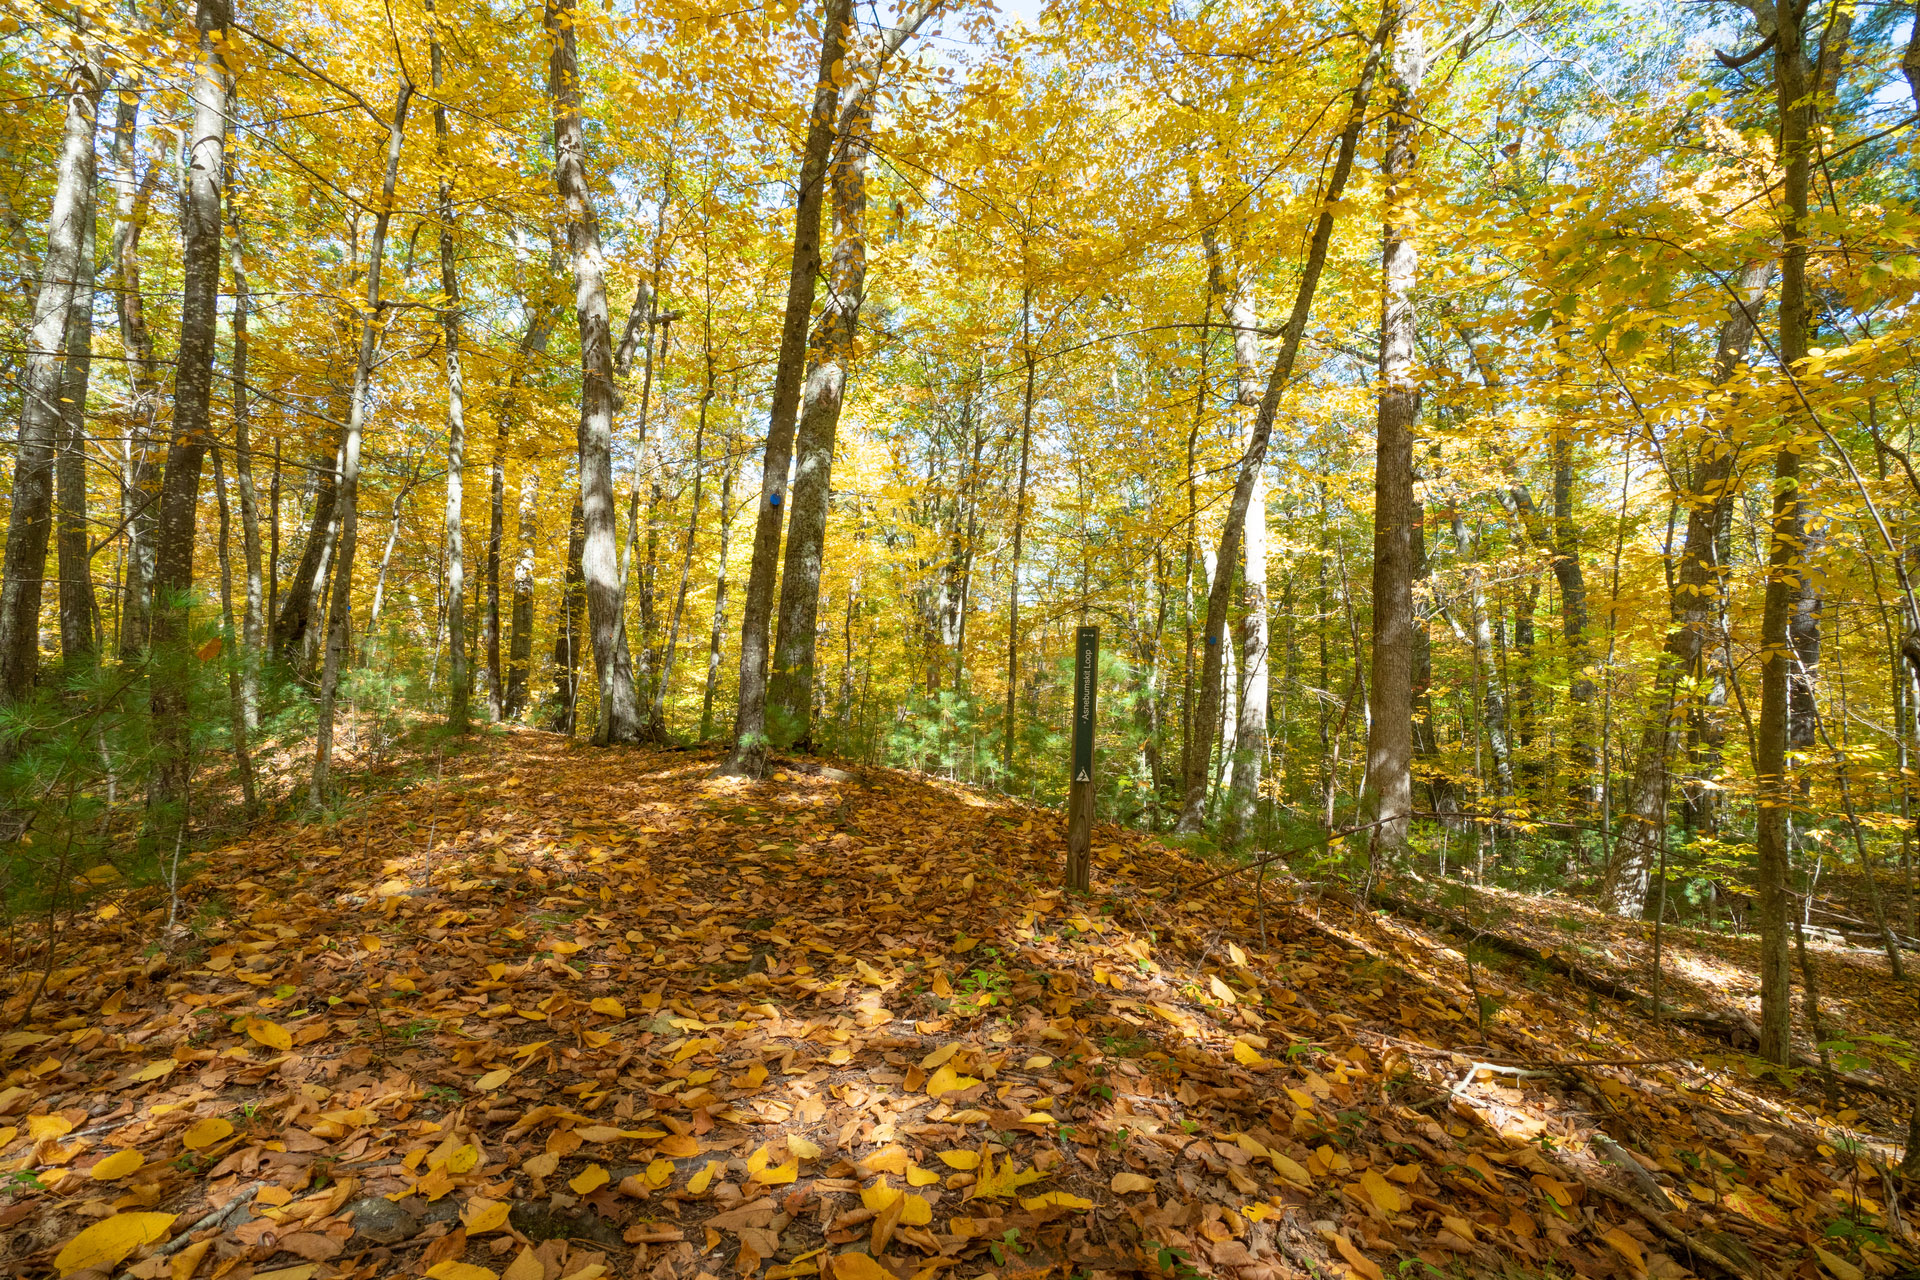 Trail covered in orange and yellow fallen leaves, leading into a forest with yellow leaves.